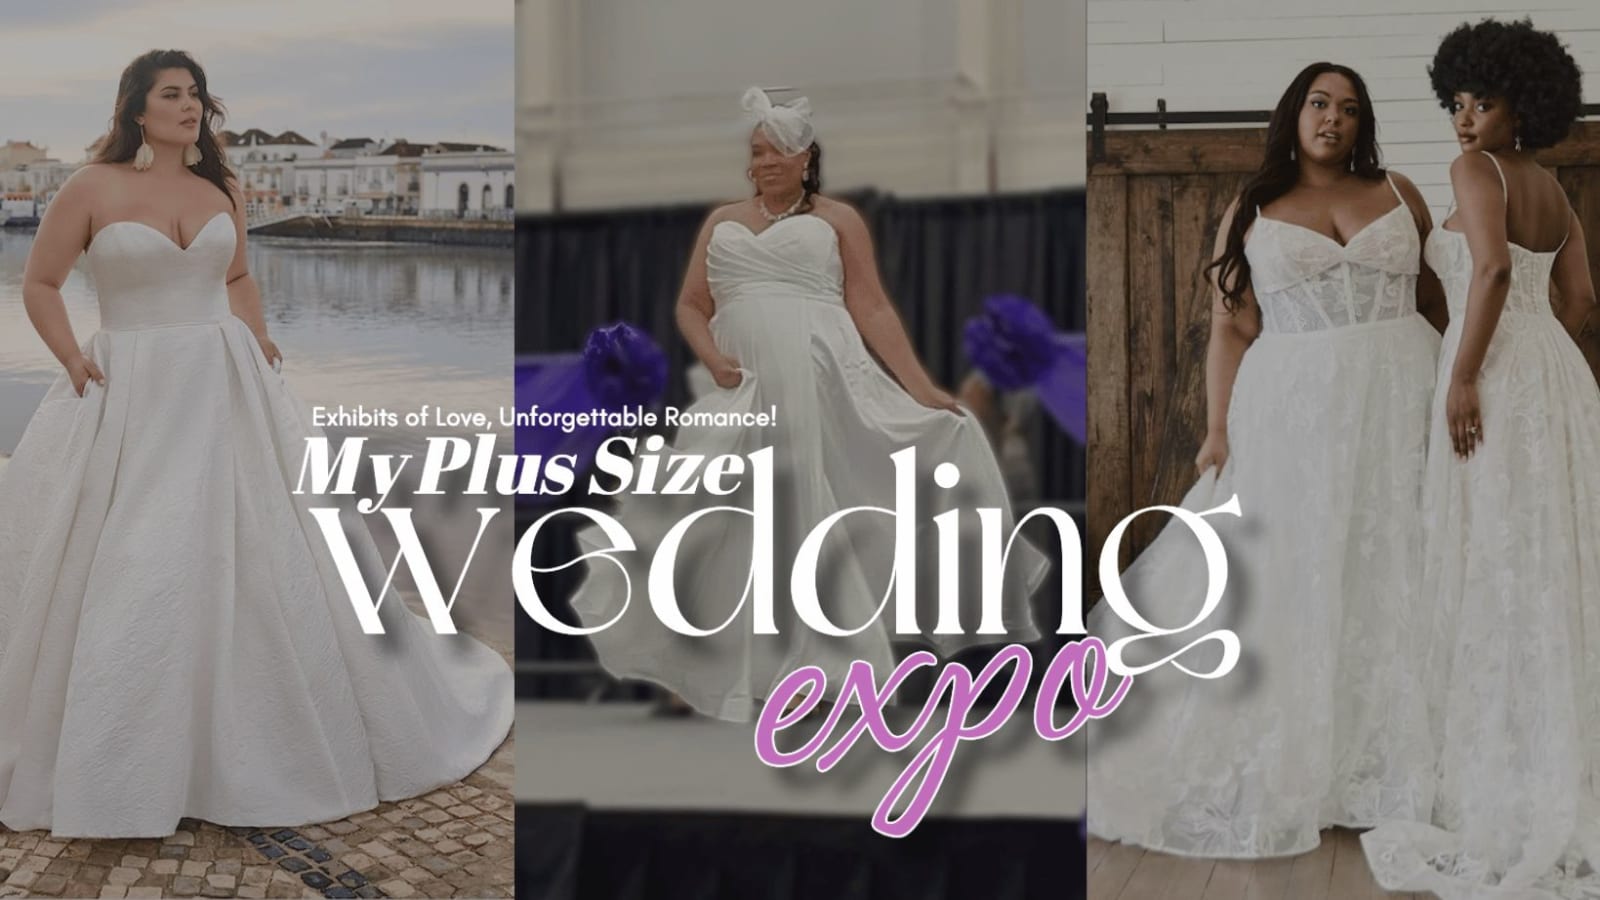 My Plus Size Wedding Expo - Spring Review